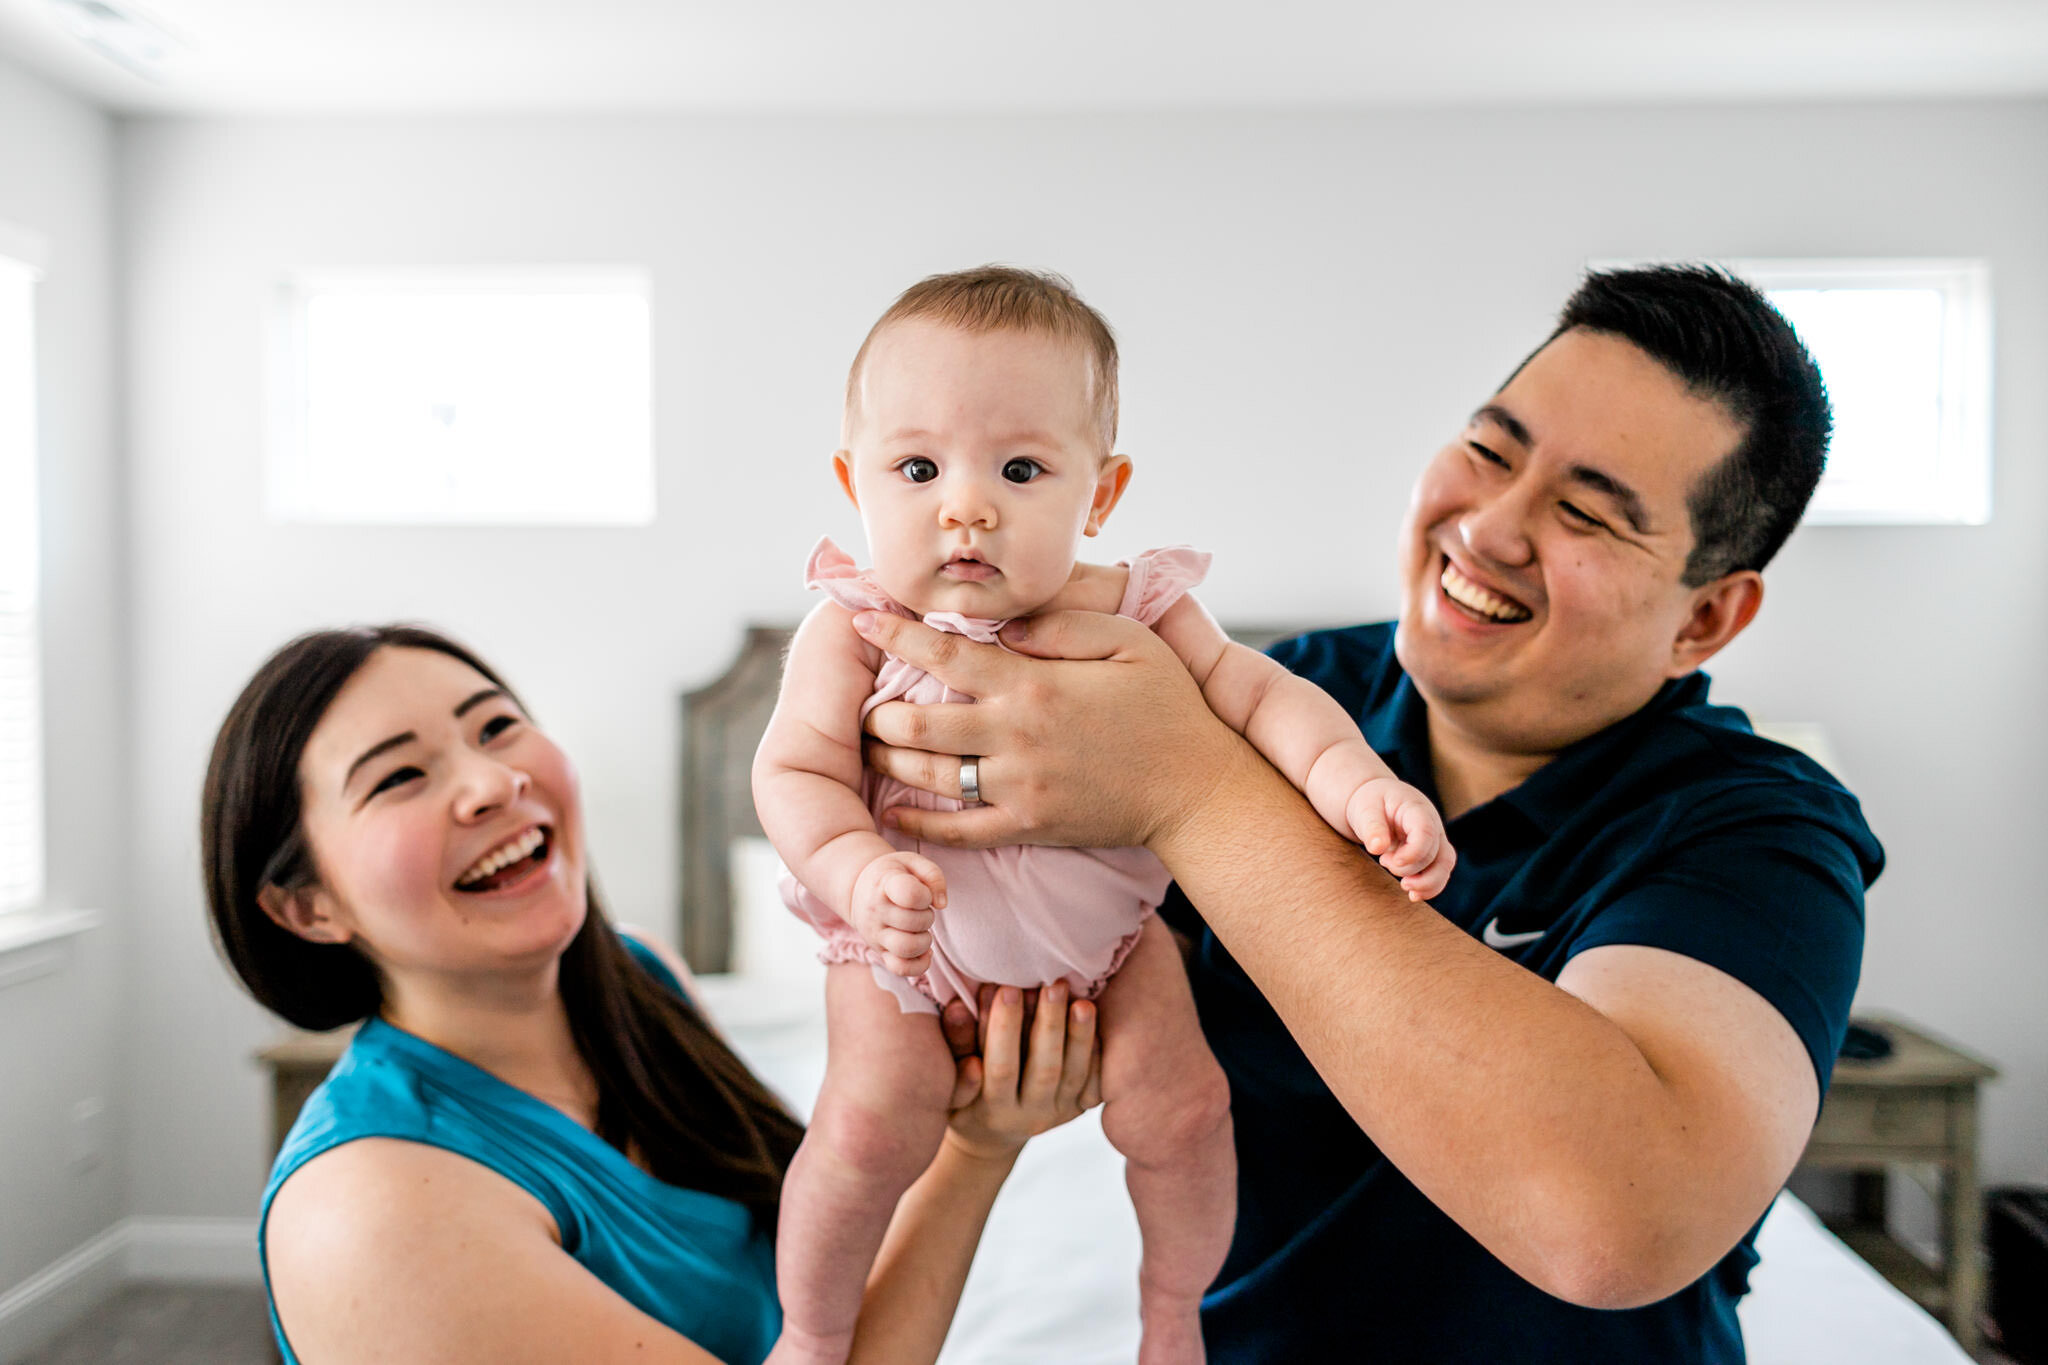 Raleigh Family Photographer | By G. Lin Photography | Man and woman smiling at baby 